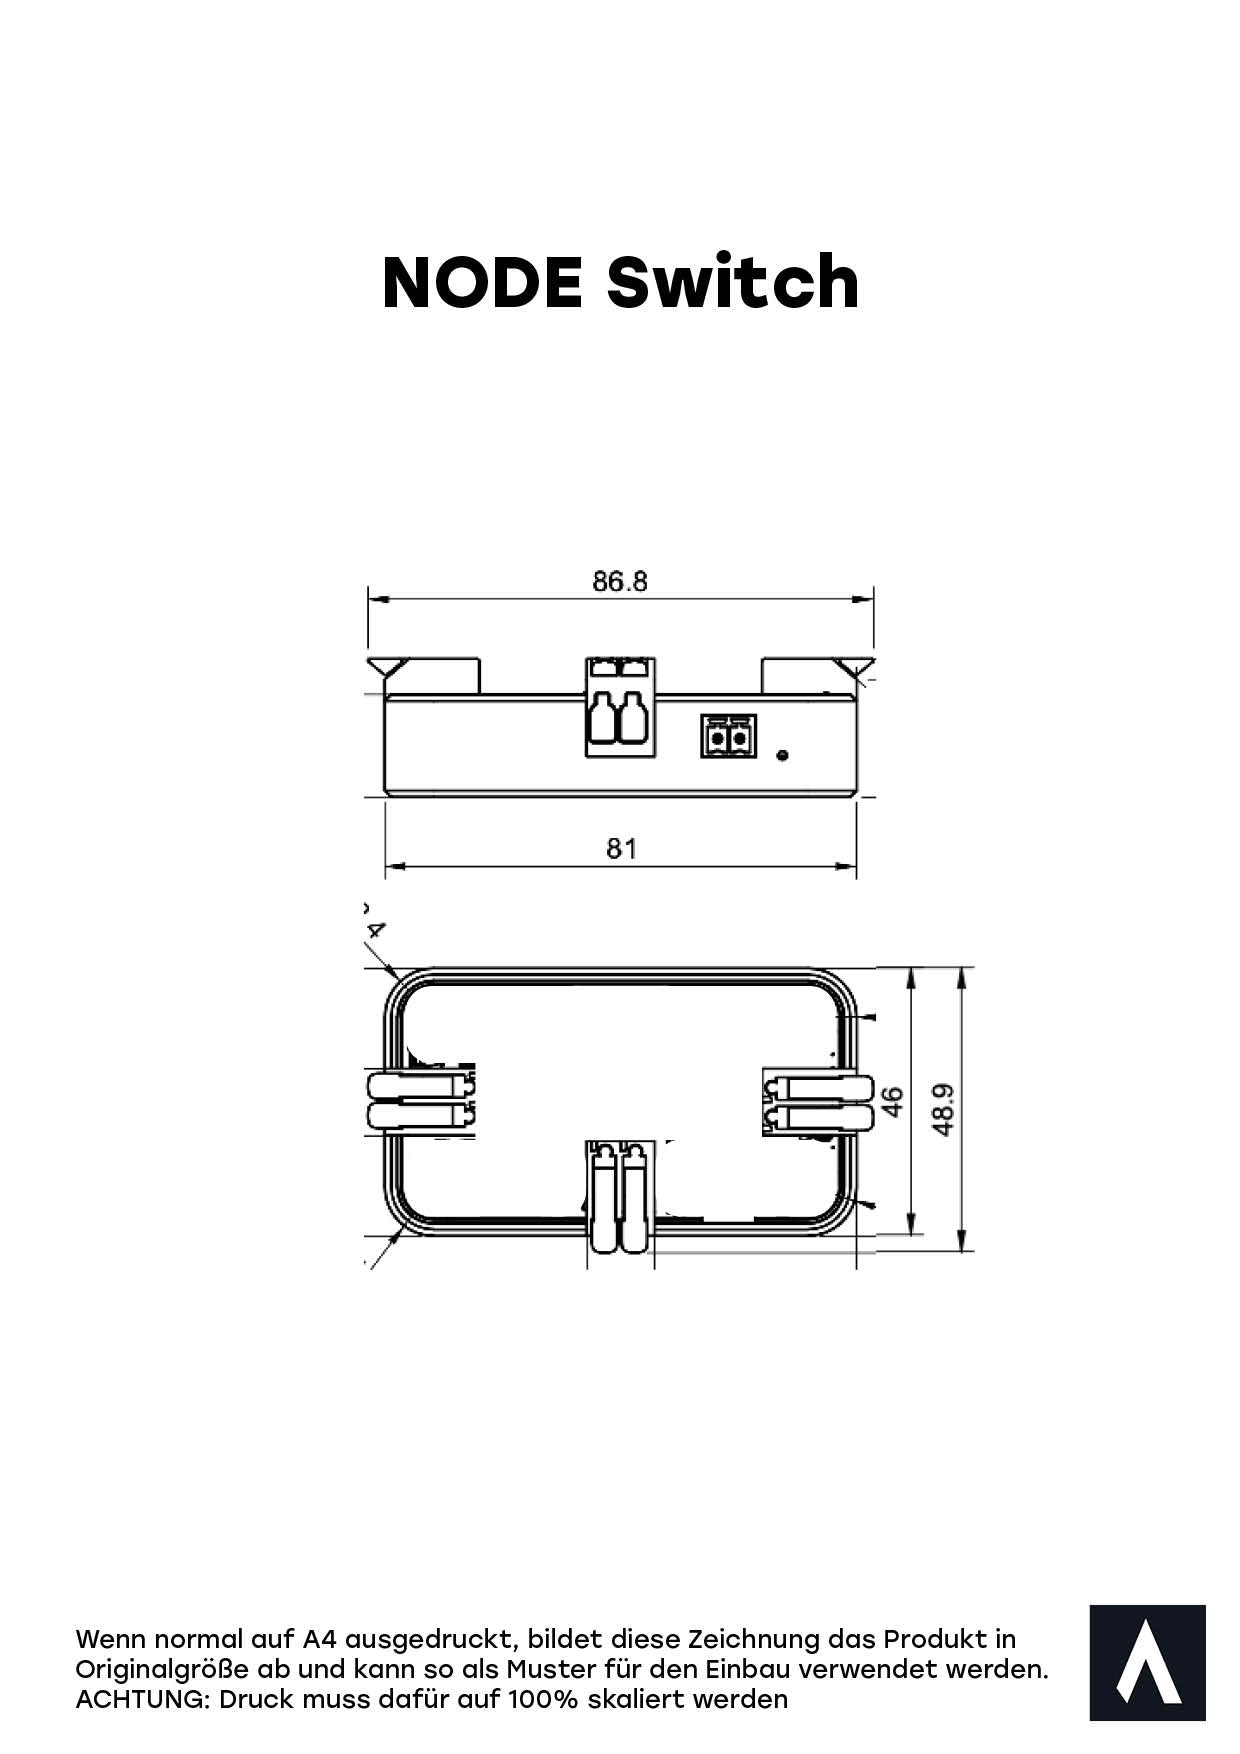 Technical Drawing as print template for revotion node switch